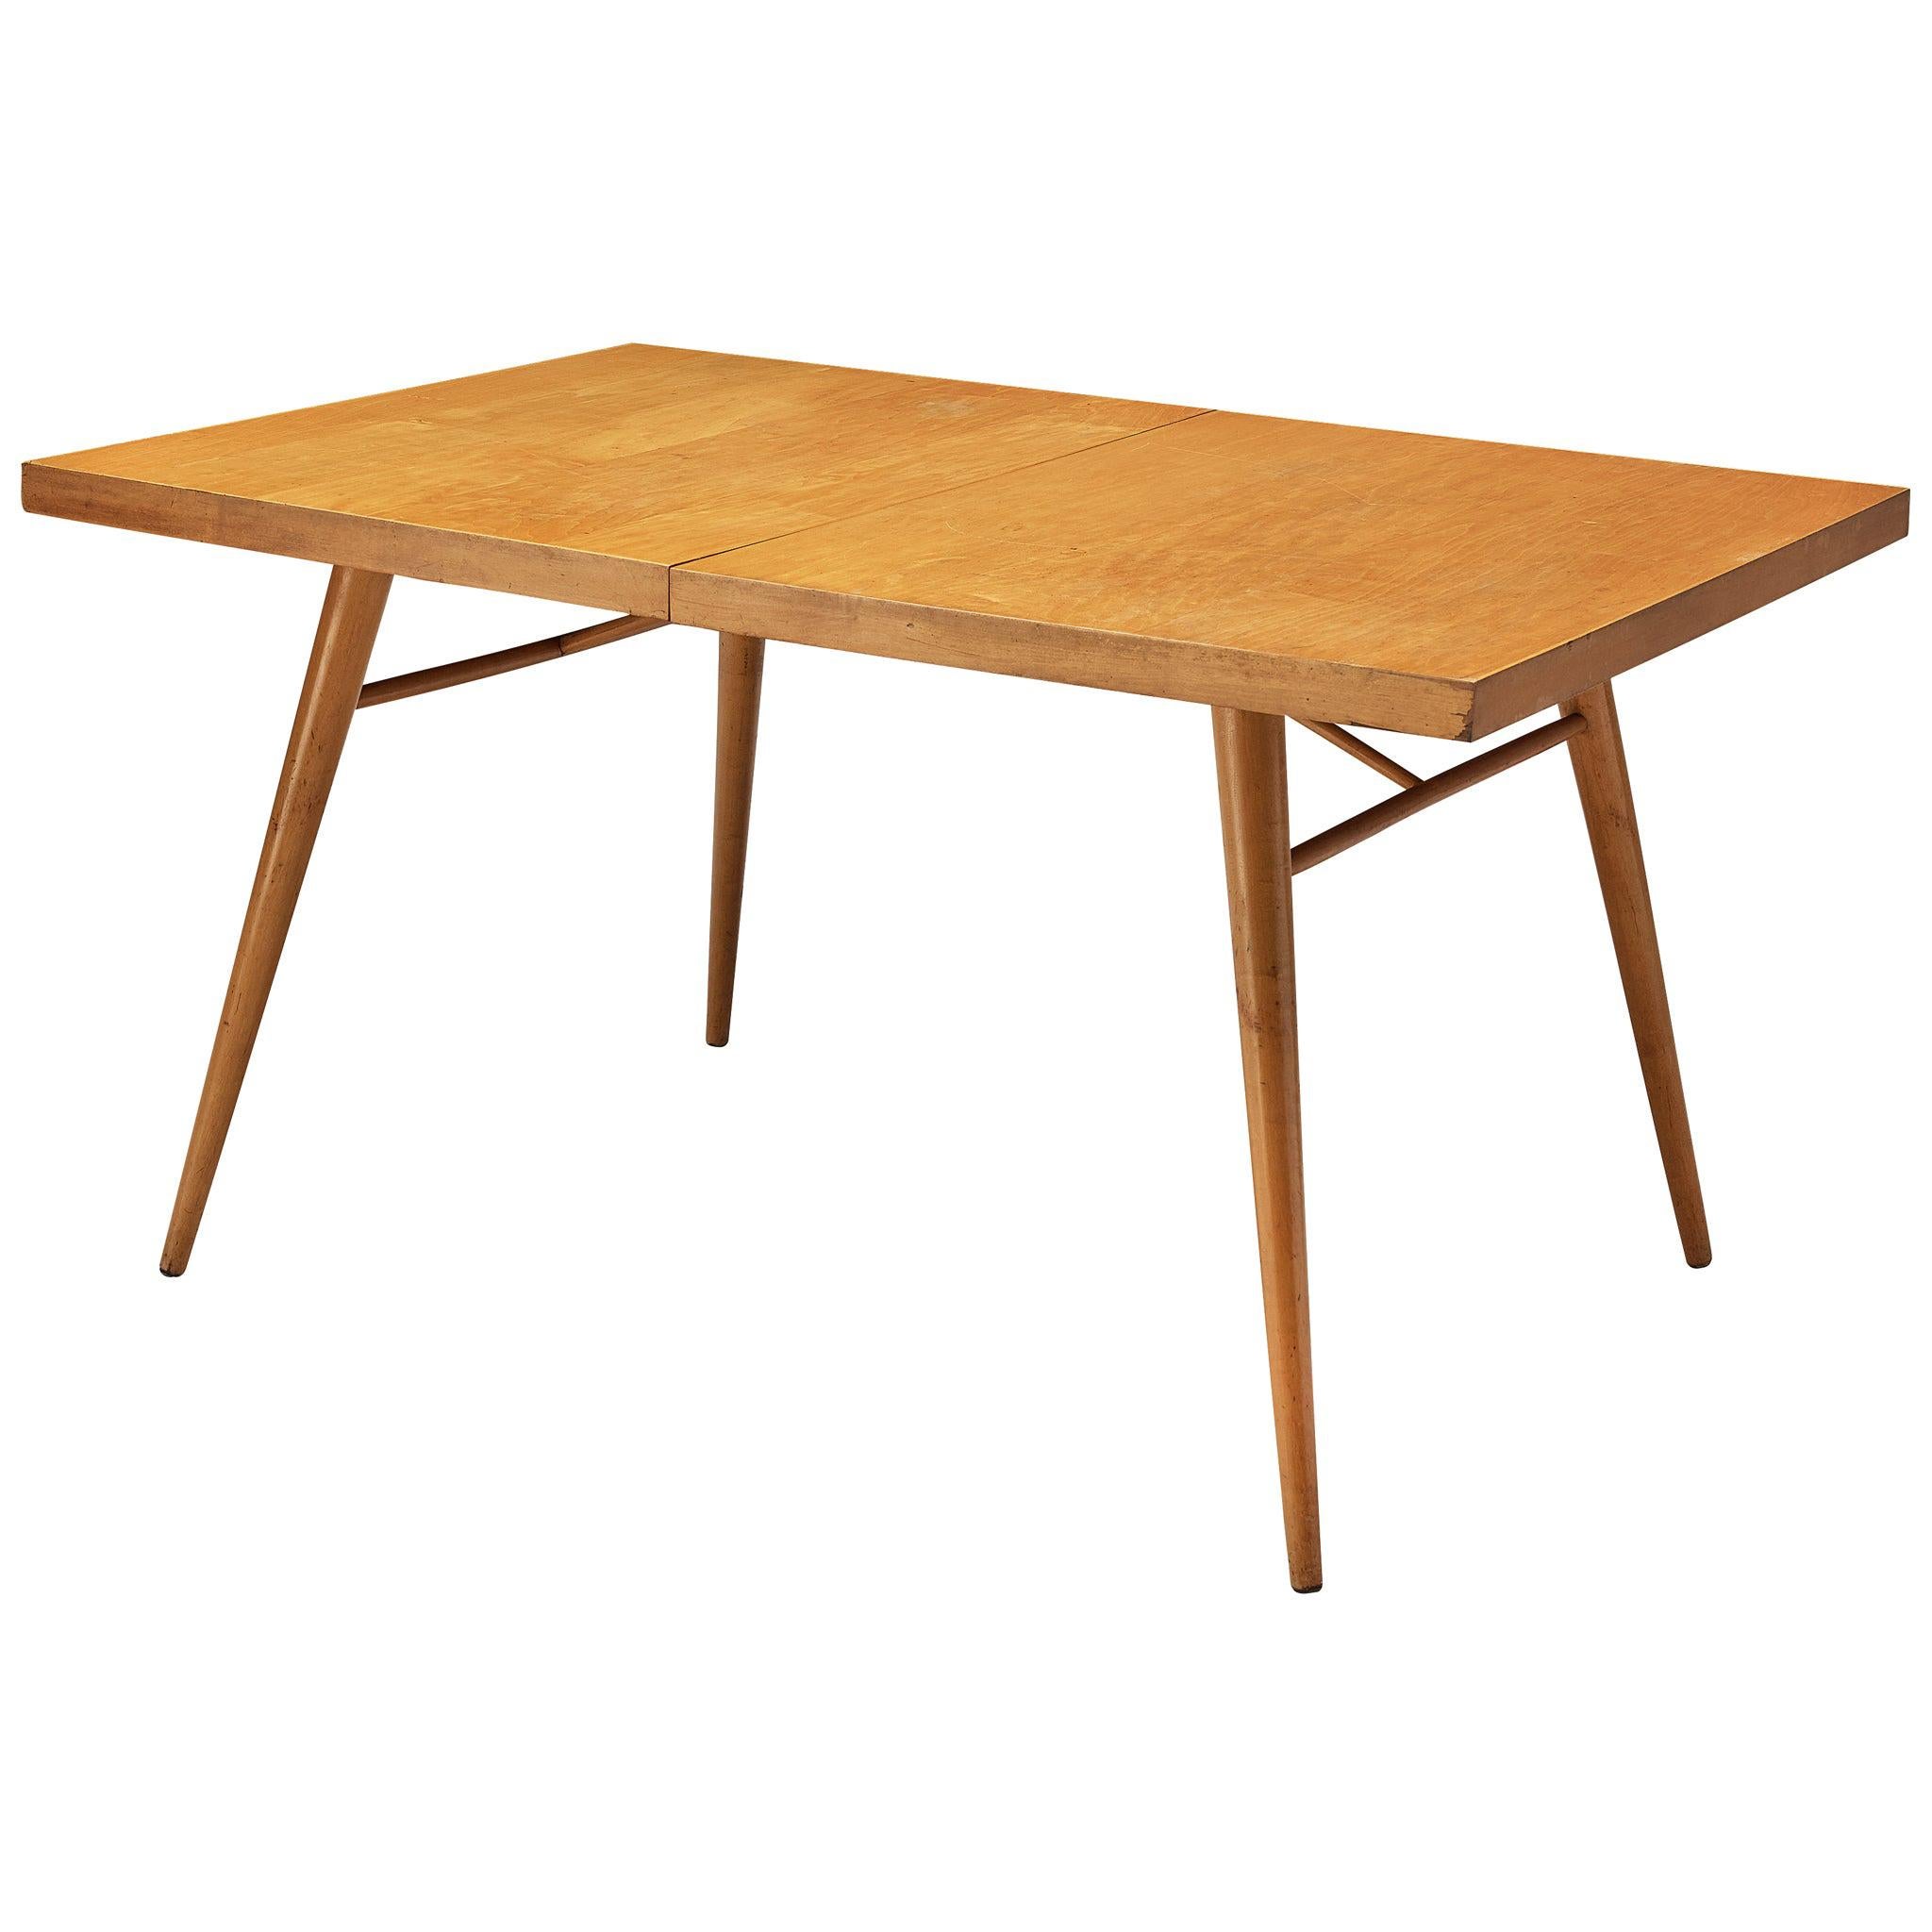 Paul McCobb for Planner Group Dining Table 1522 in Maple